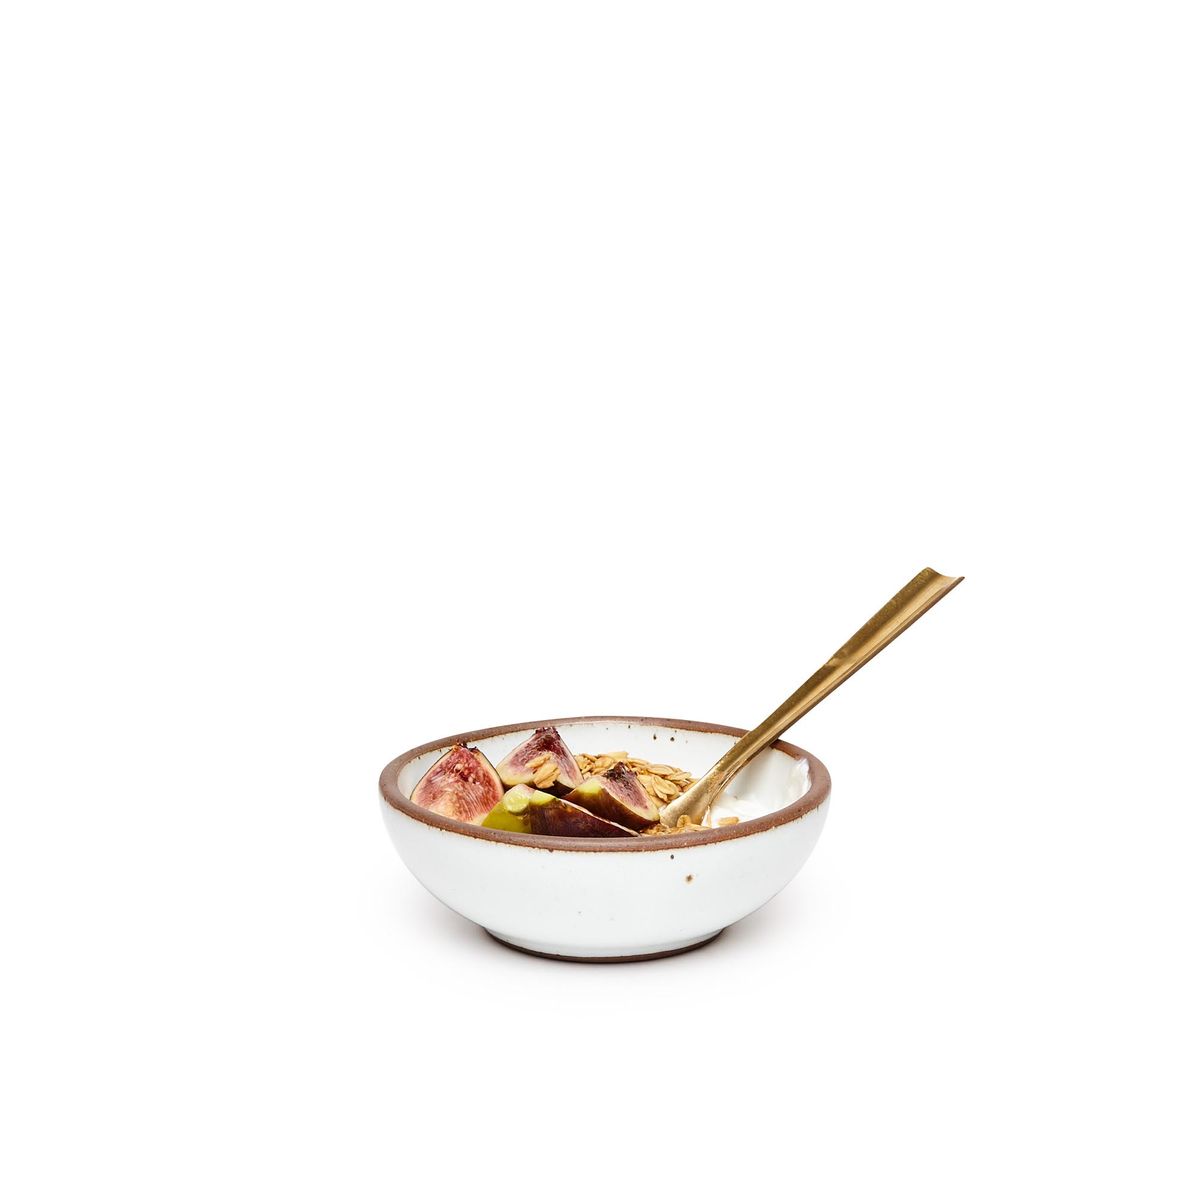 A small shallow ceramic bowl in a cool white color featuring iron speckles and an unglazed rim, filled with granola and a brass spoon